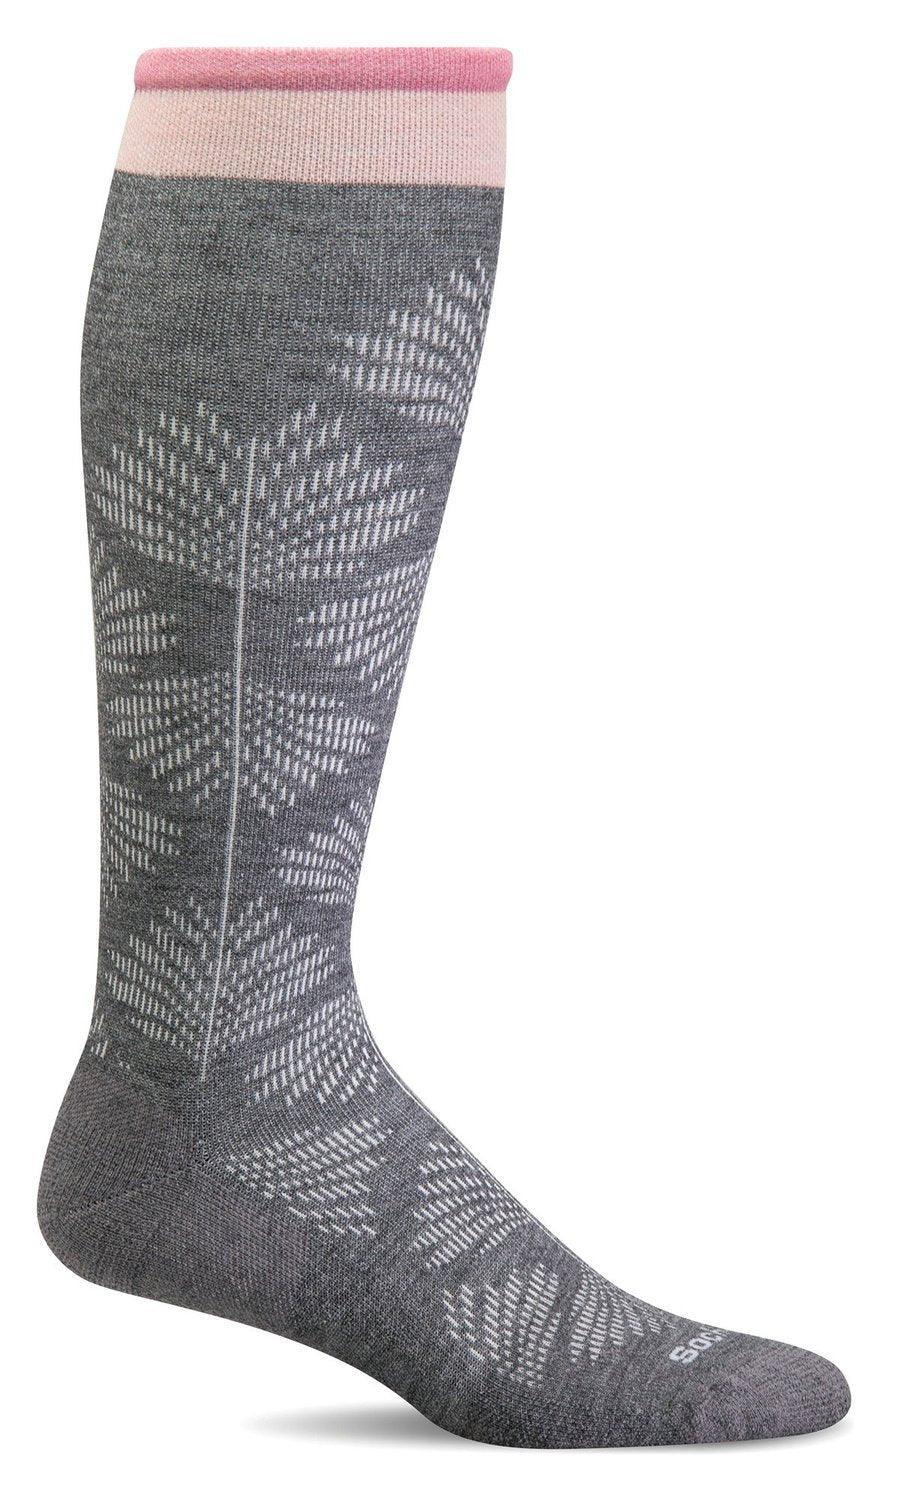 Full Floral | Wide Calf Fit | Moderate Graduated Compression Socks - Sockwell - The Sock Monster